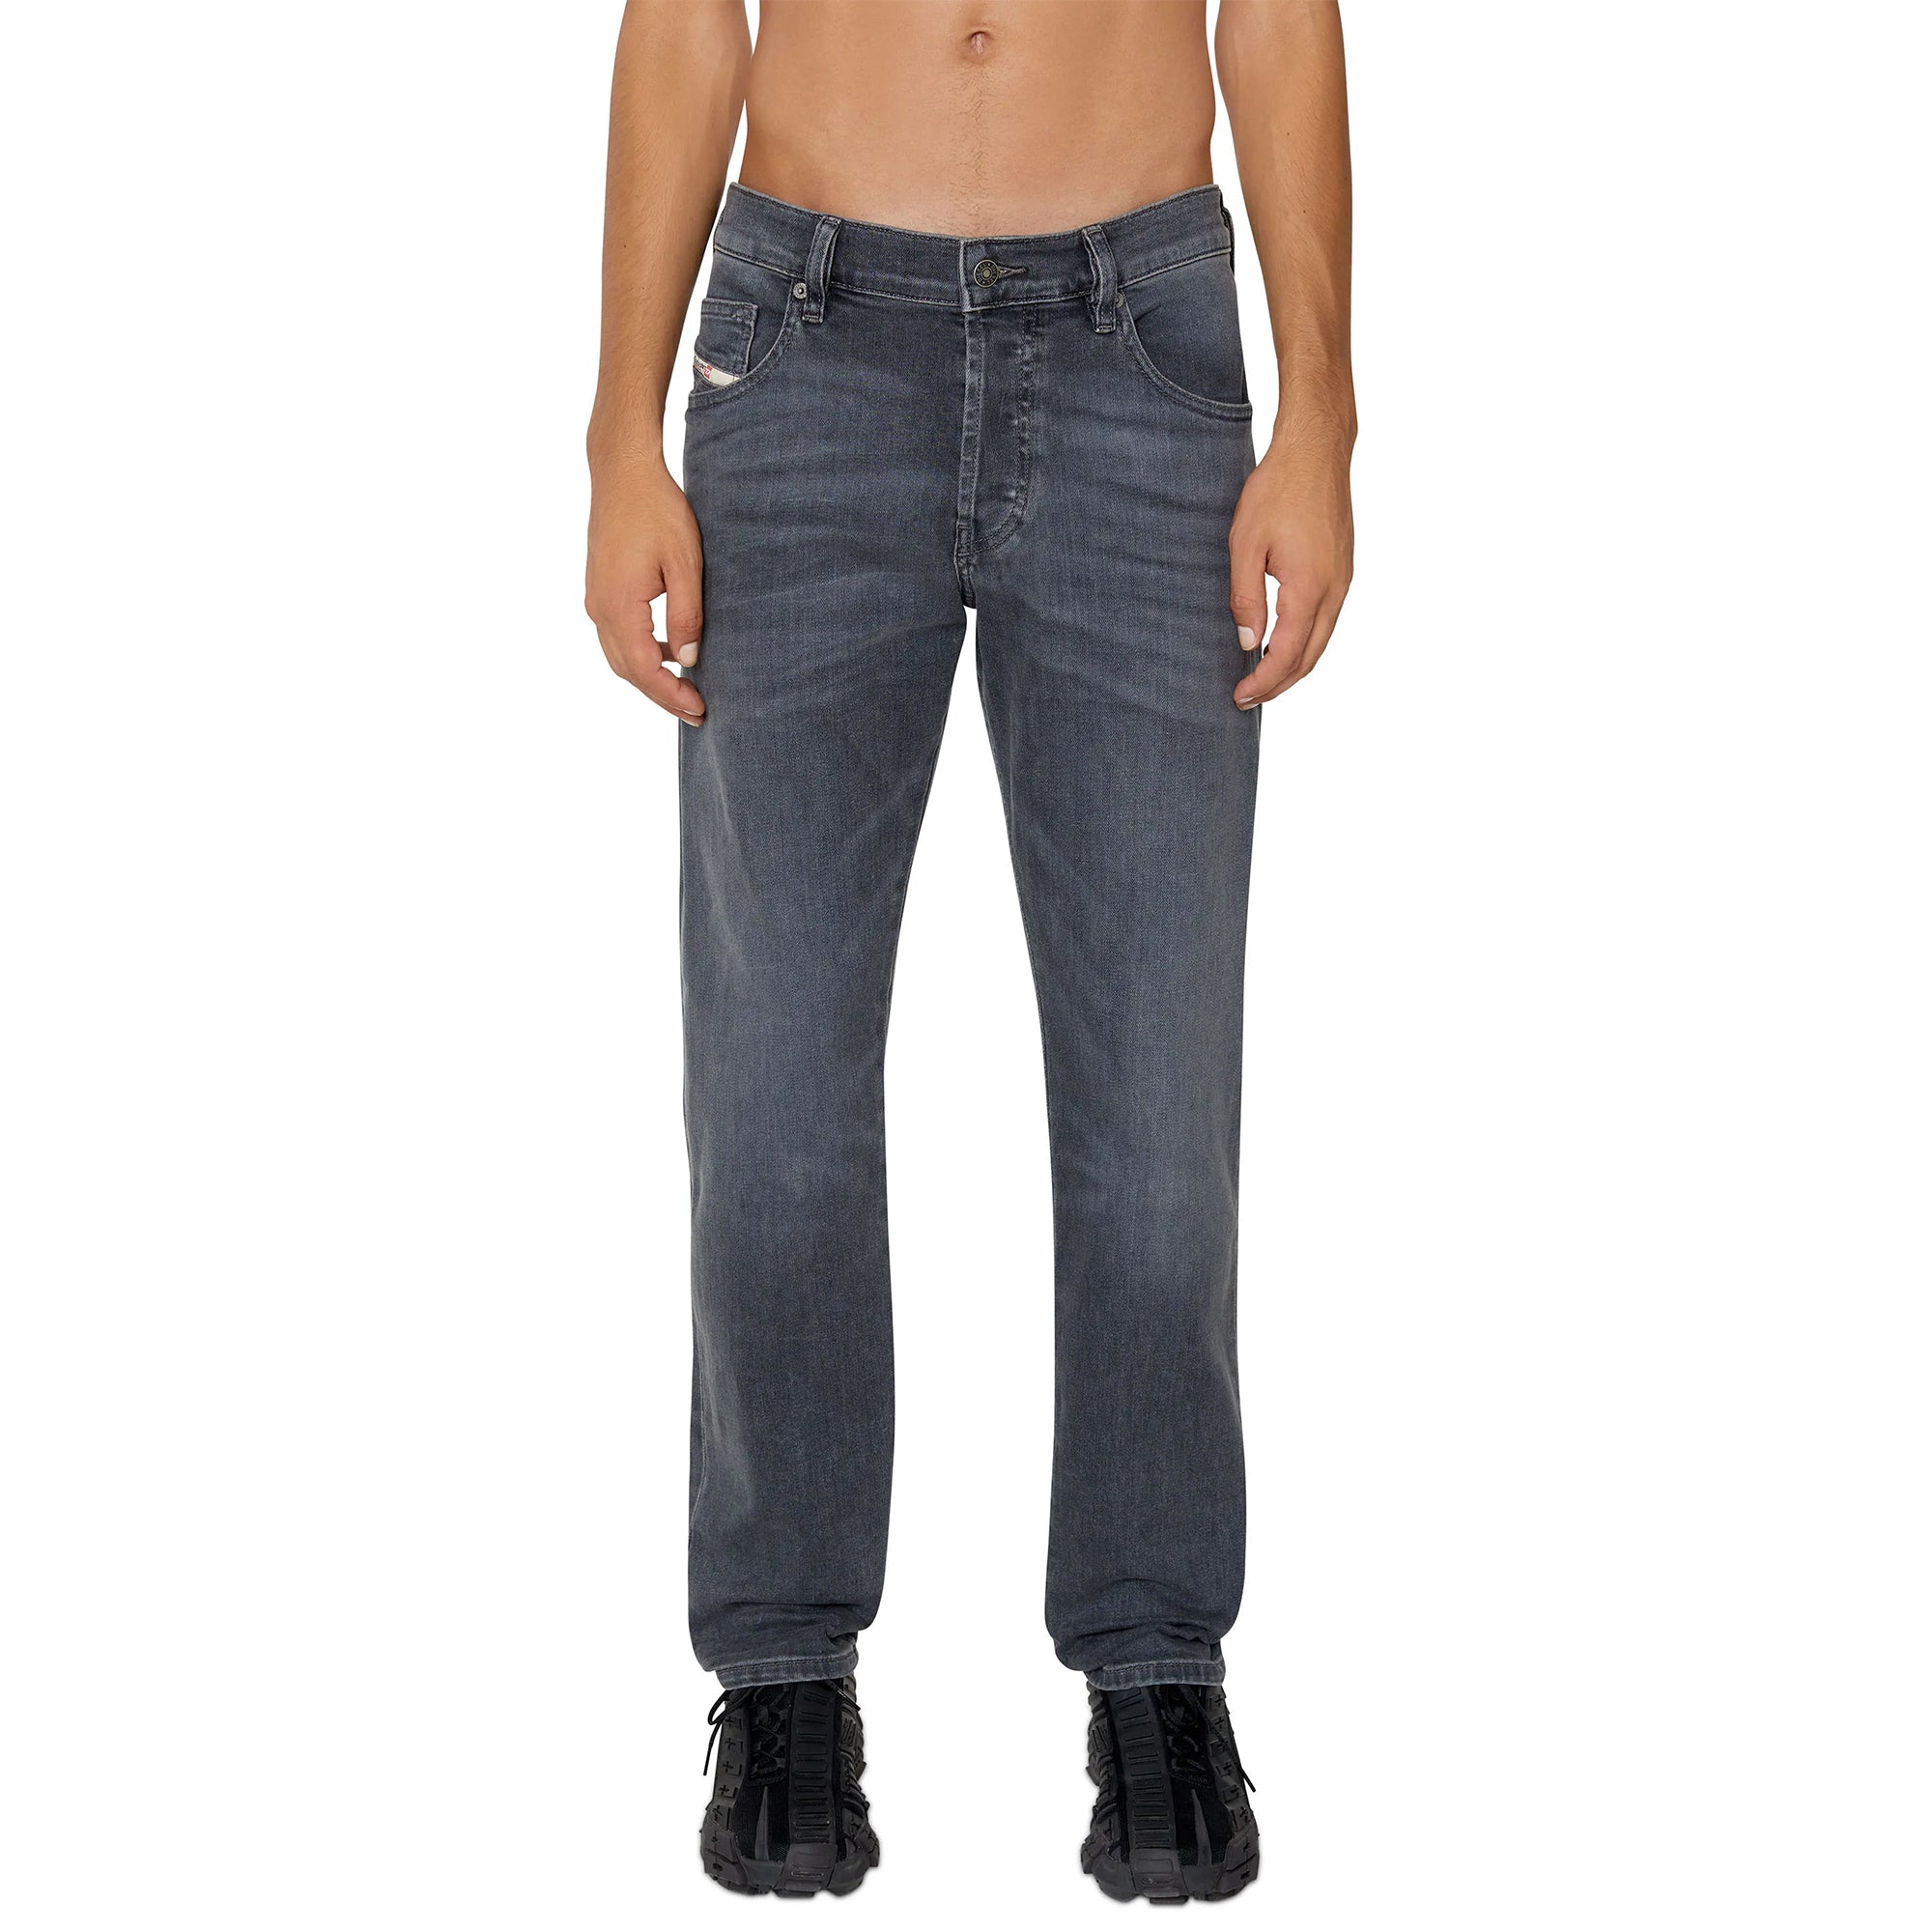 Diesel D-Yennox 0ELAX Tapered Fit Jeans - Grey